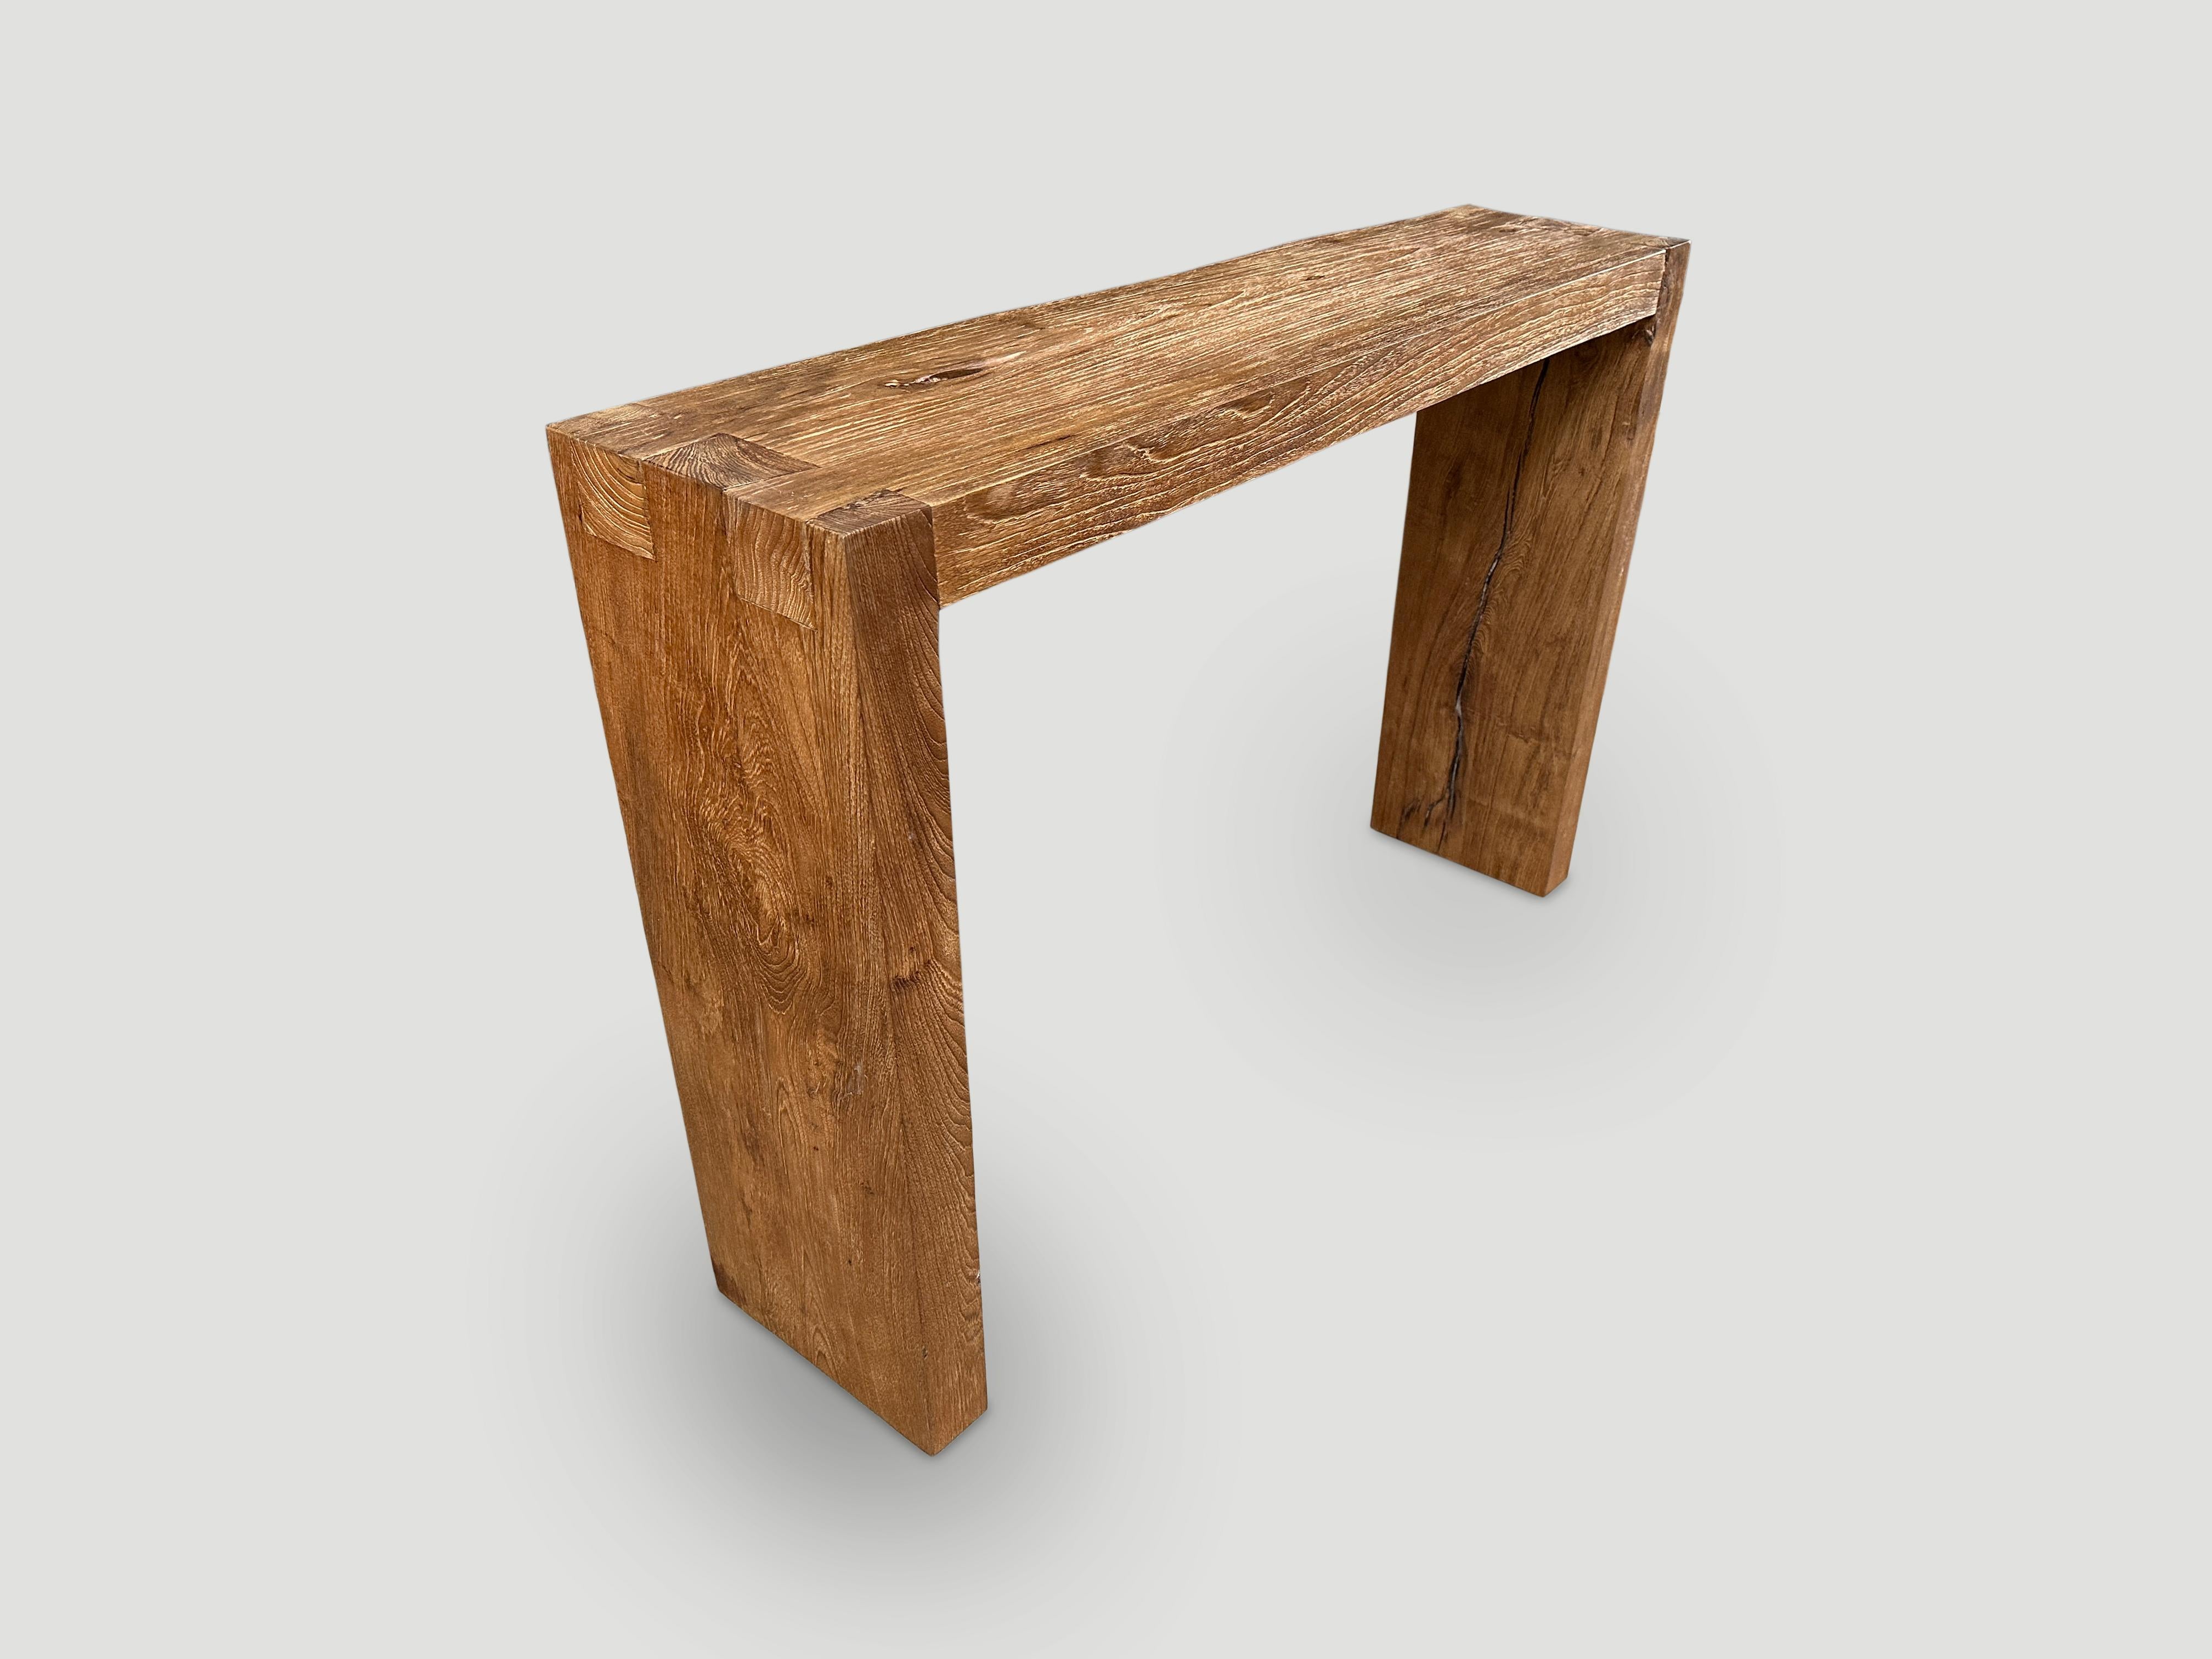 Andrianna Shamaris Minimalist Reclaimed Teak Wood Console Table In Excellent Condition For Sale In New York, NY